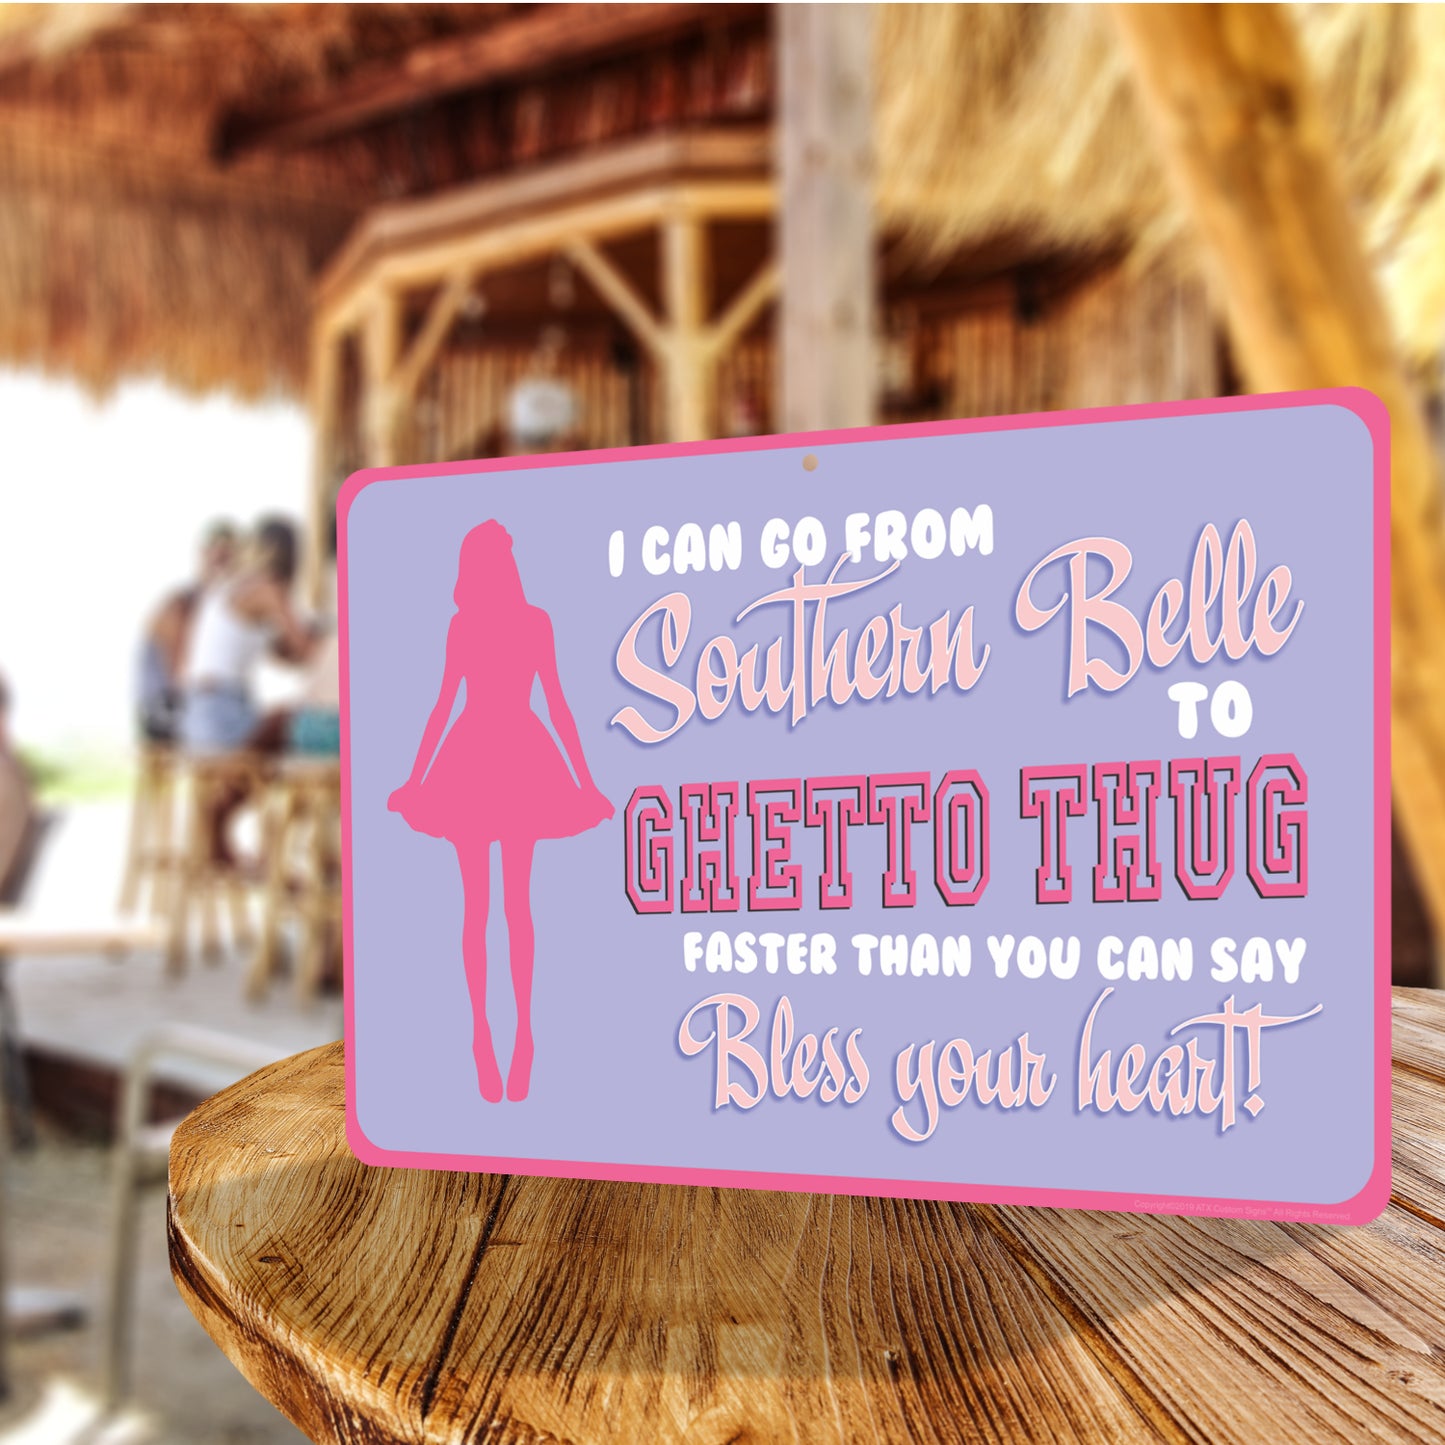 Funny Bar Sign, I can go from Southern Belle to Ghetto Thug faster that you can say Bless your heart! (Dark) - Size 8 x 12